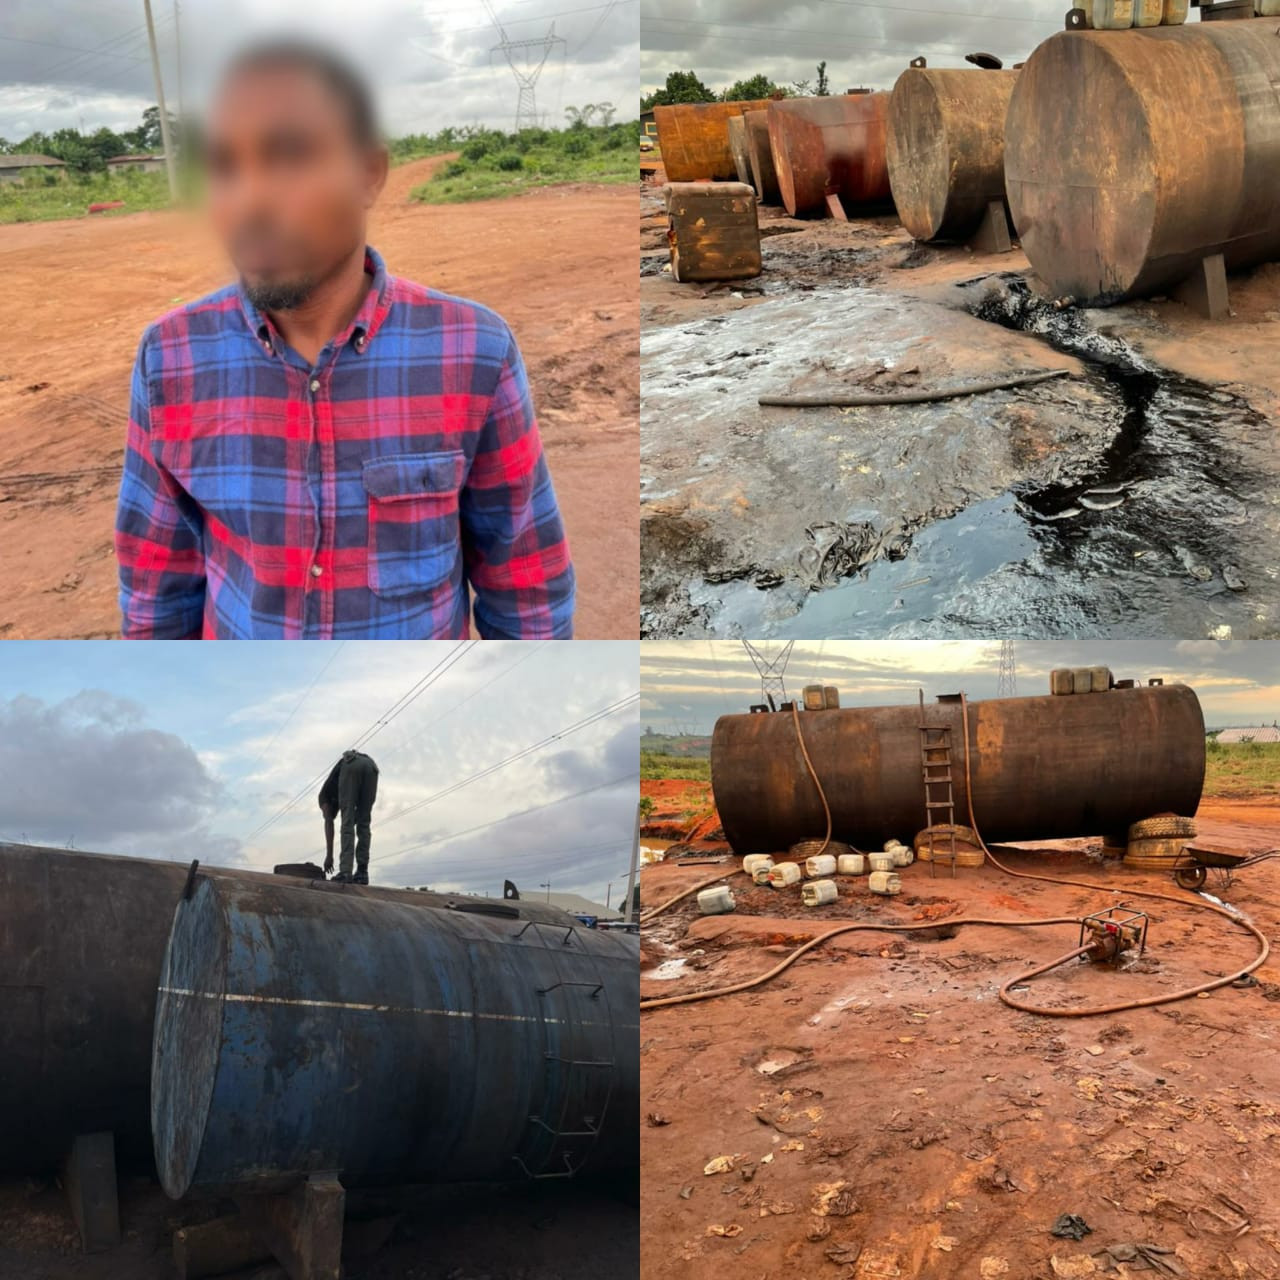 Police bust two petroleum refining sites in Edo state, arrest two suspect and recover trucks